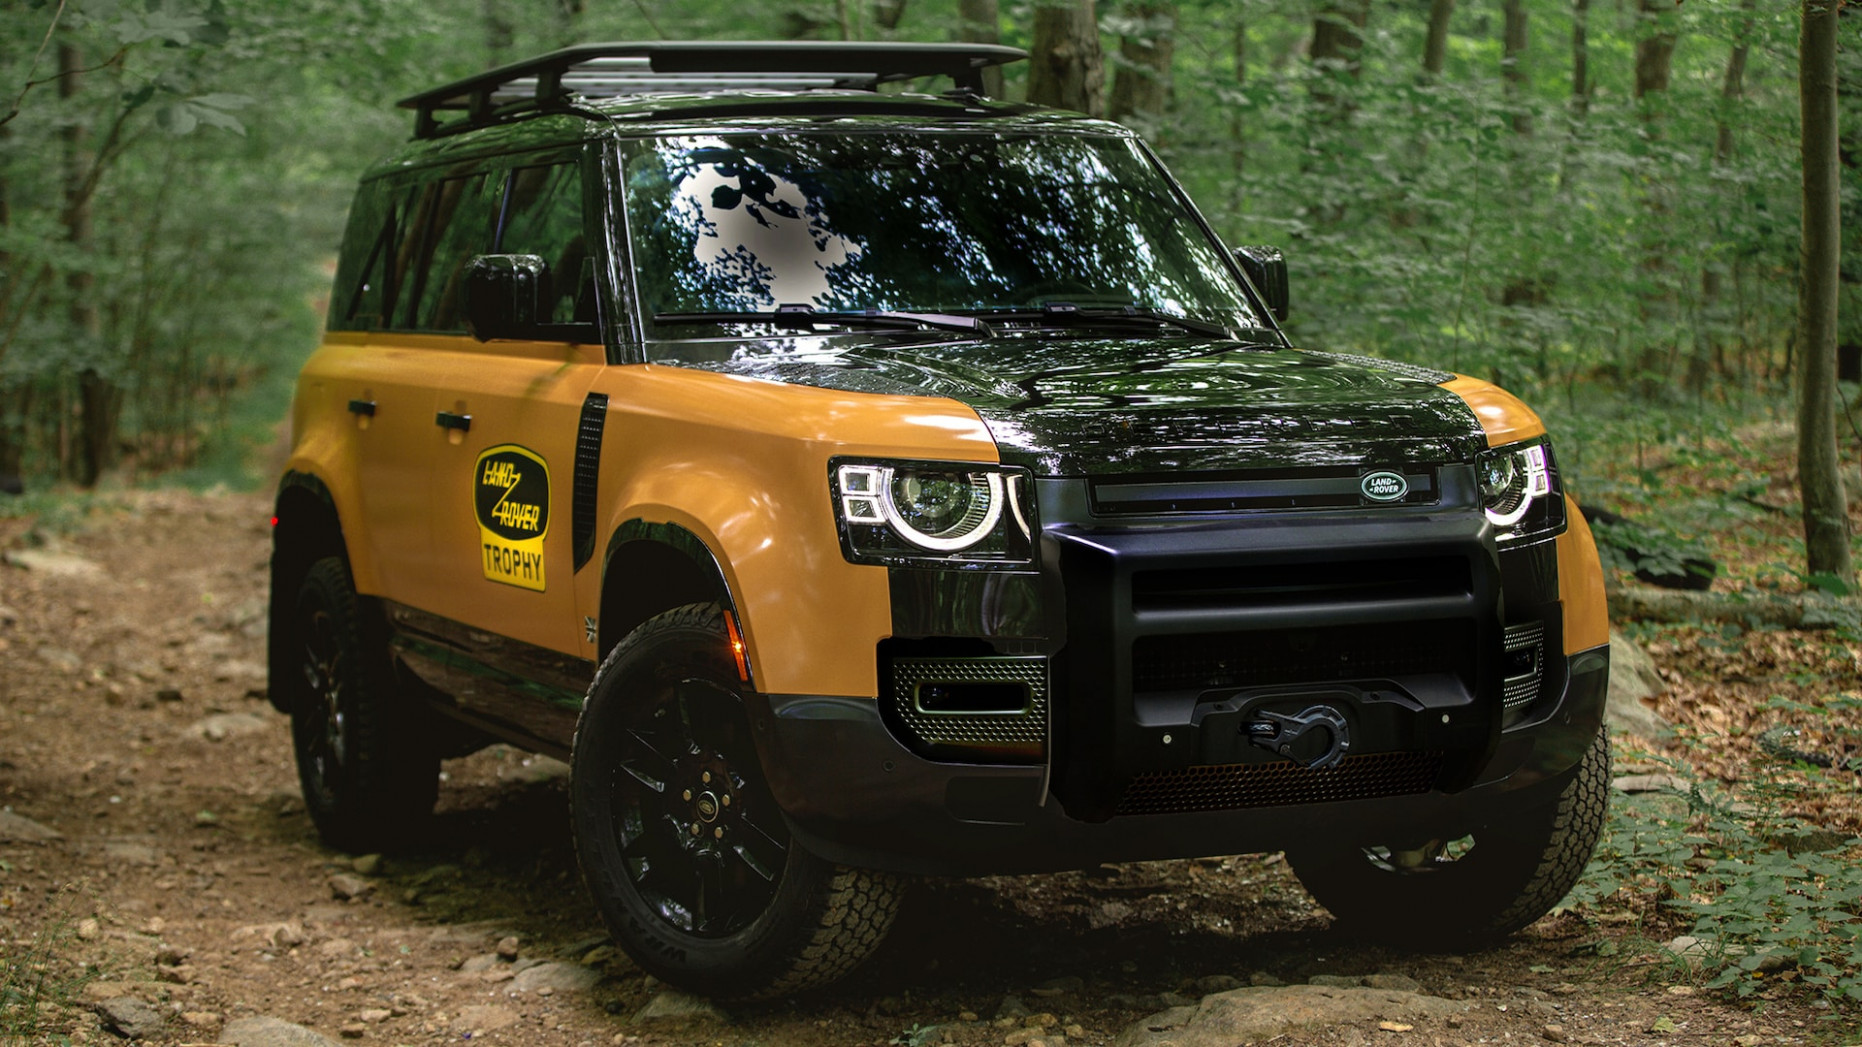 New Concept 2022 land rover defender images